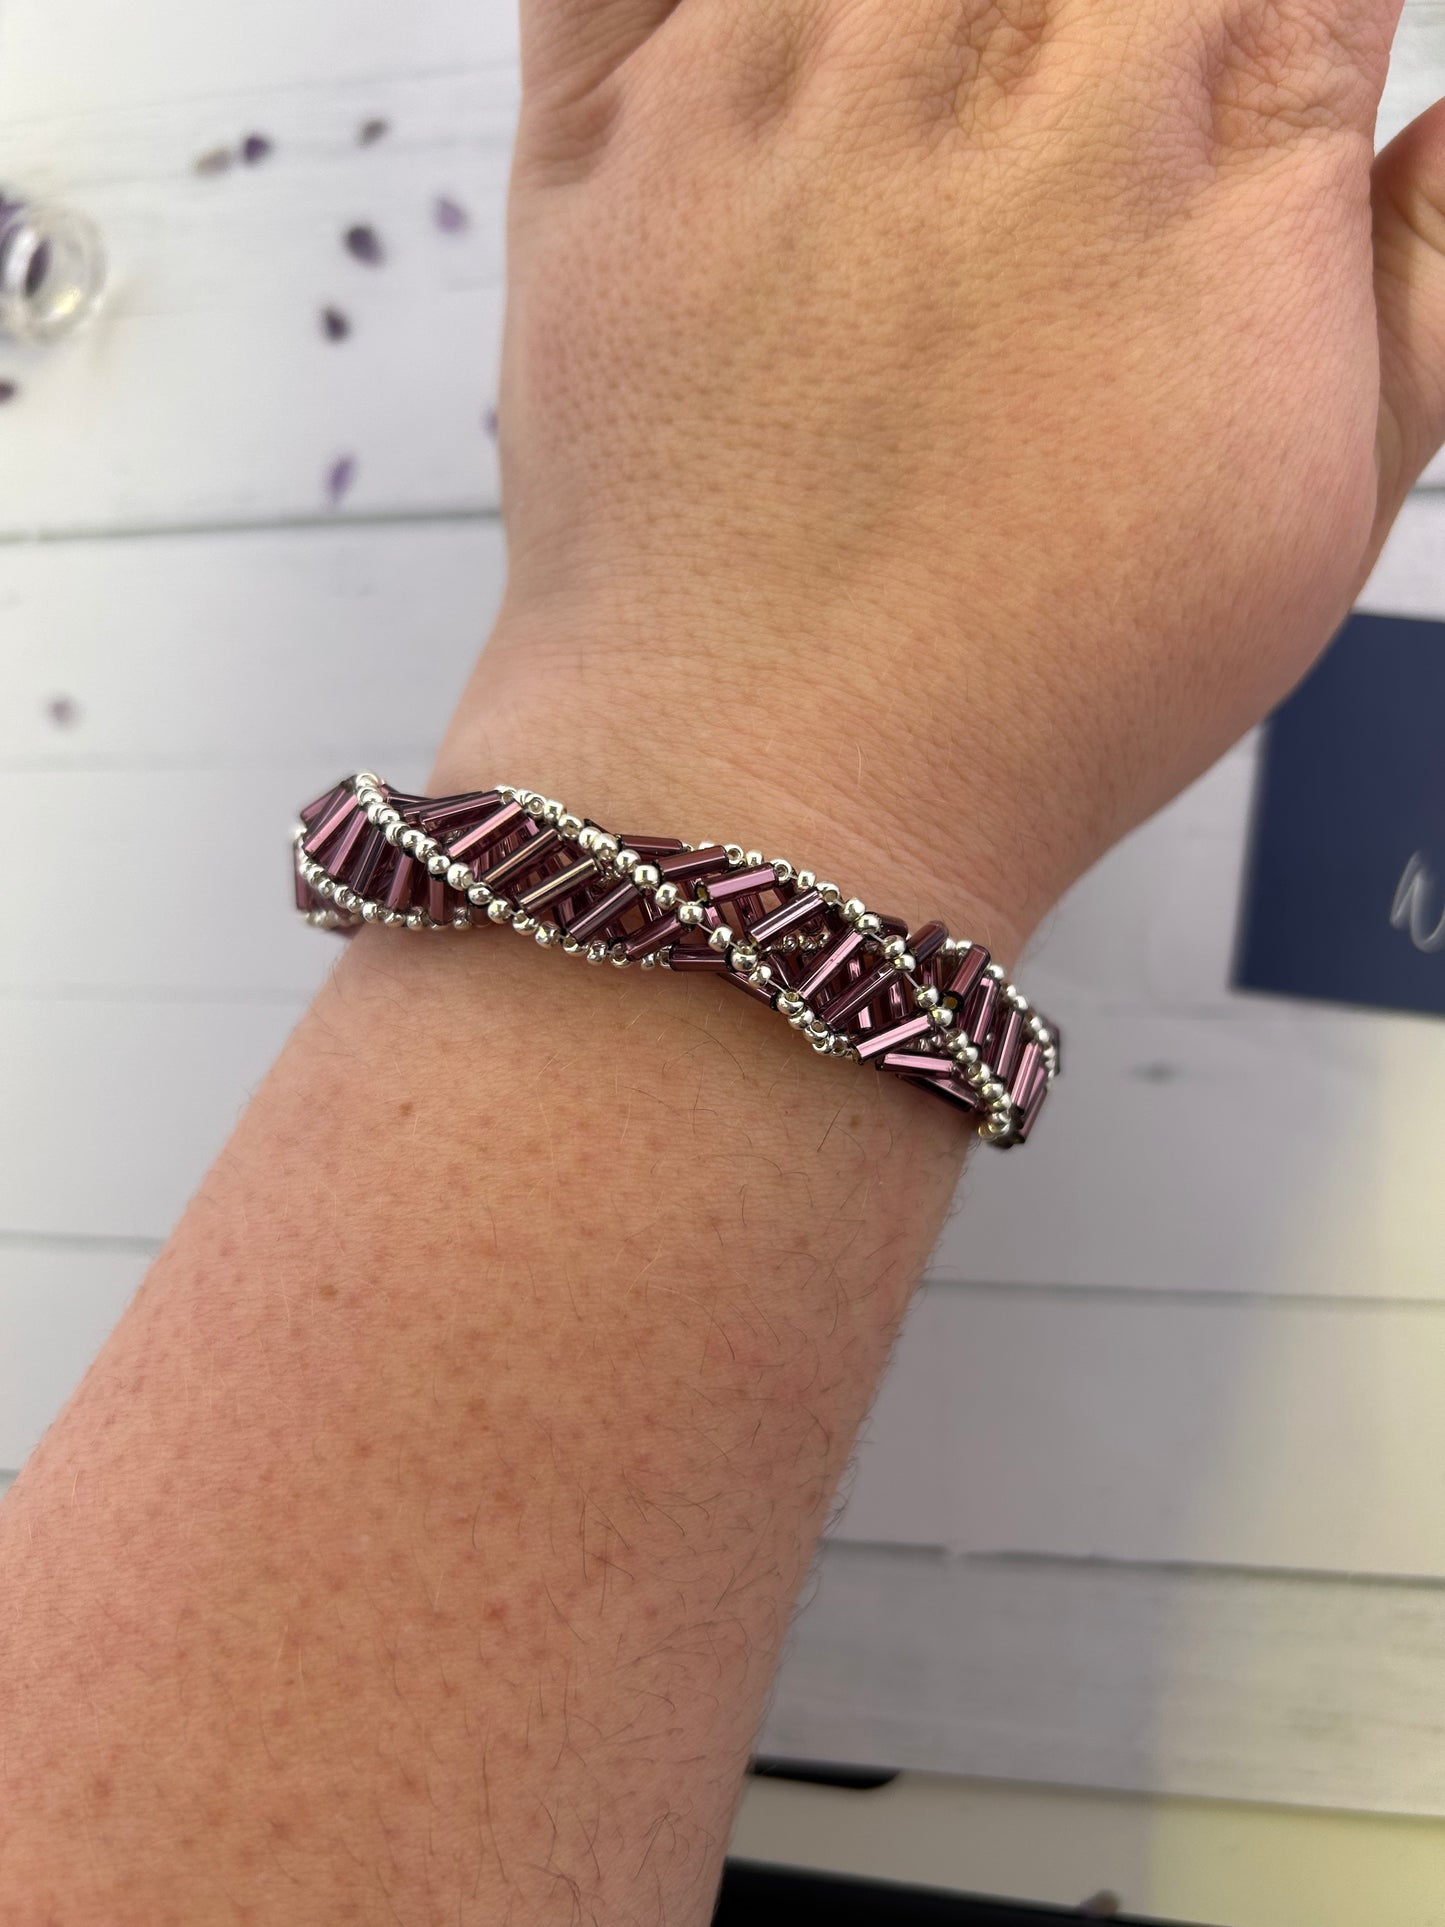 Handmade Spiral Purple Glass Beaded Statement Bracelet with Silver Glass Accent Beads and Stainless Steel Toggle Clasp.